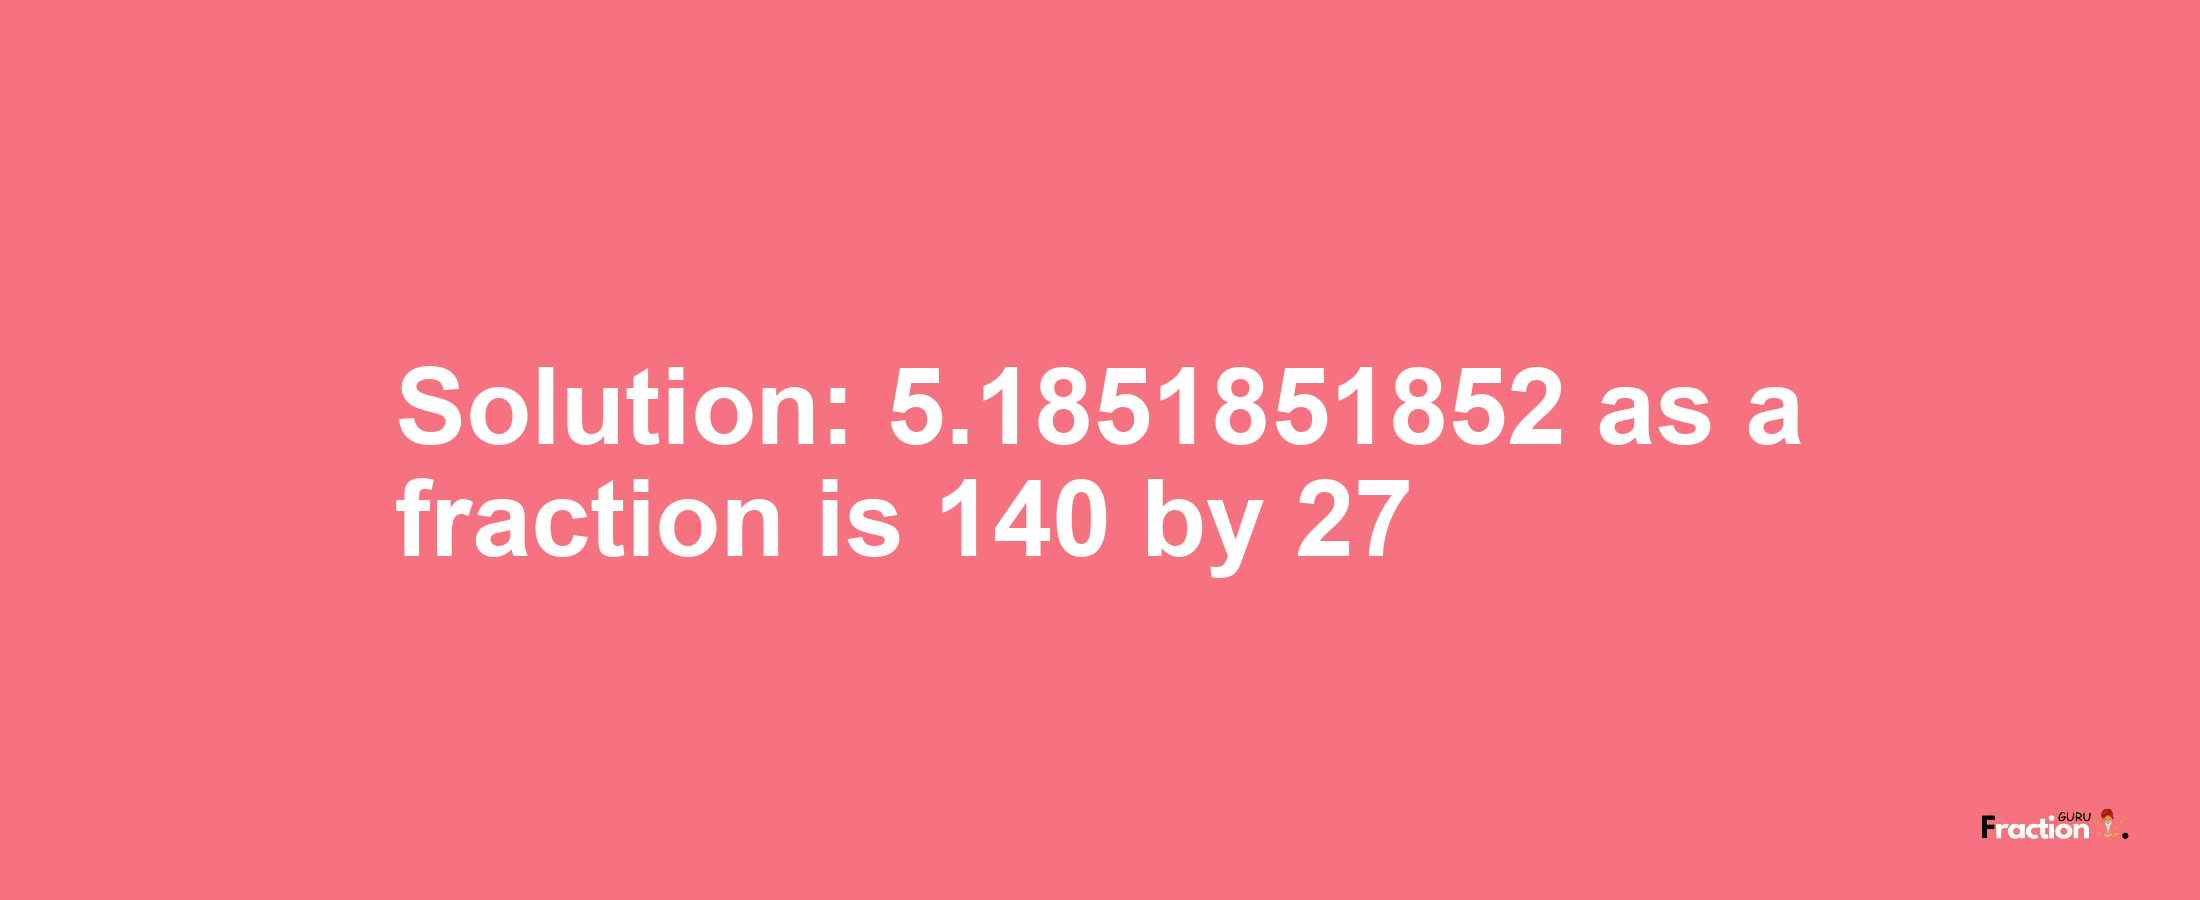 Solution:5.1851851852 as a fraction is 140/27